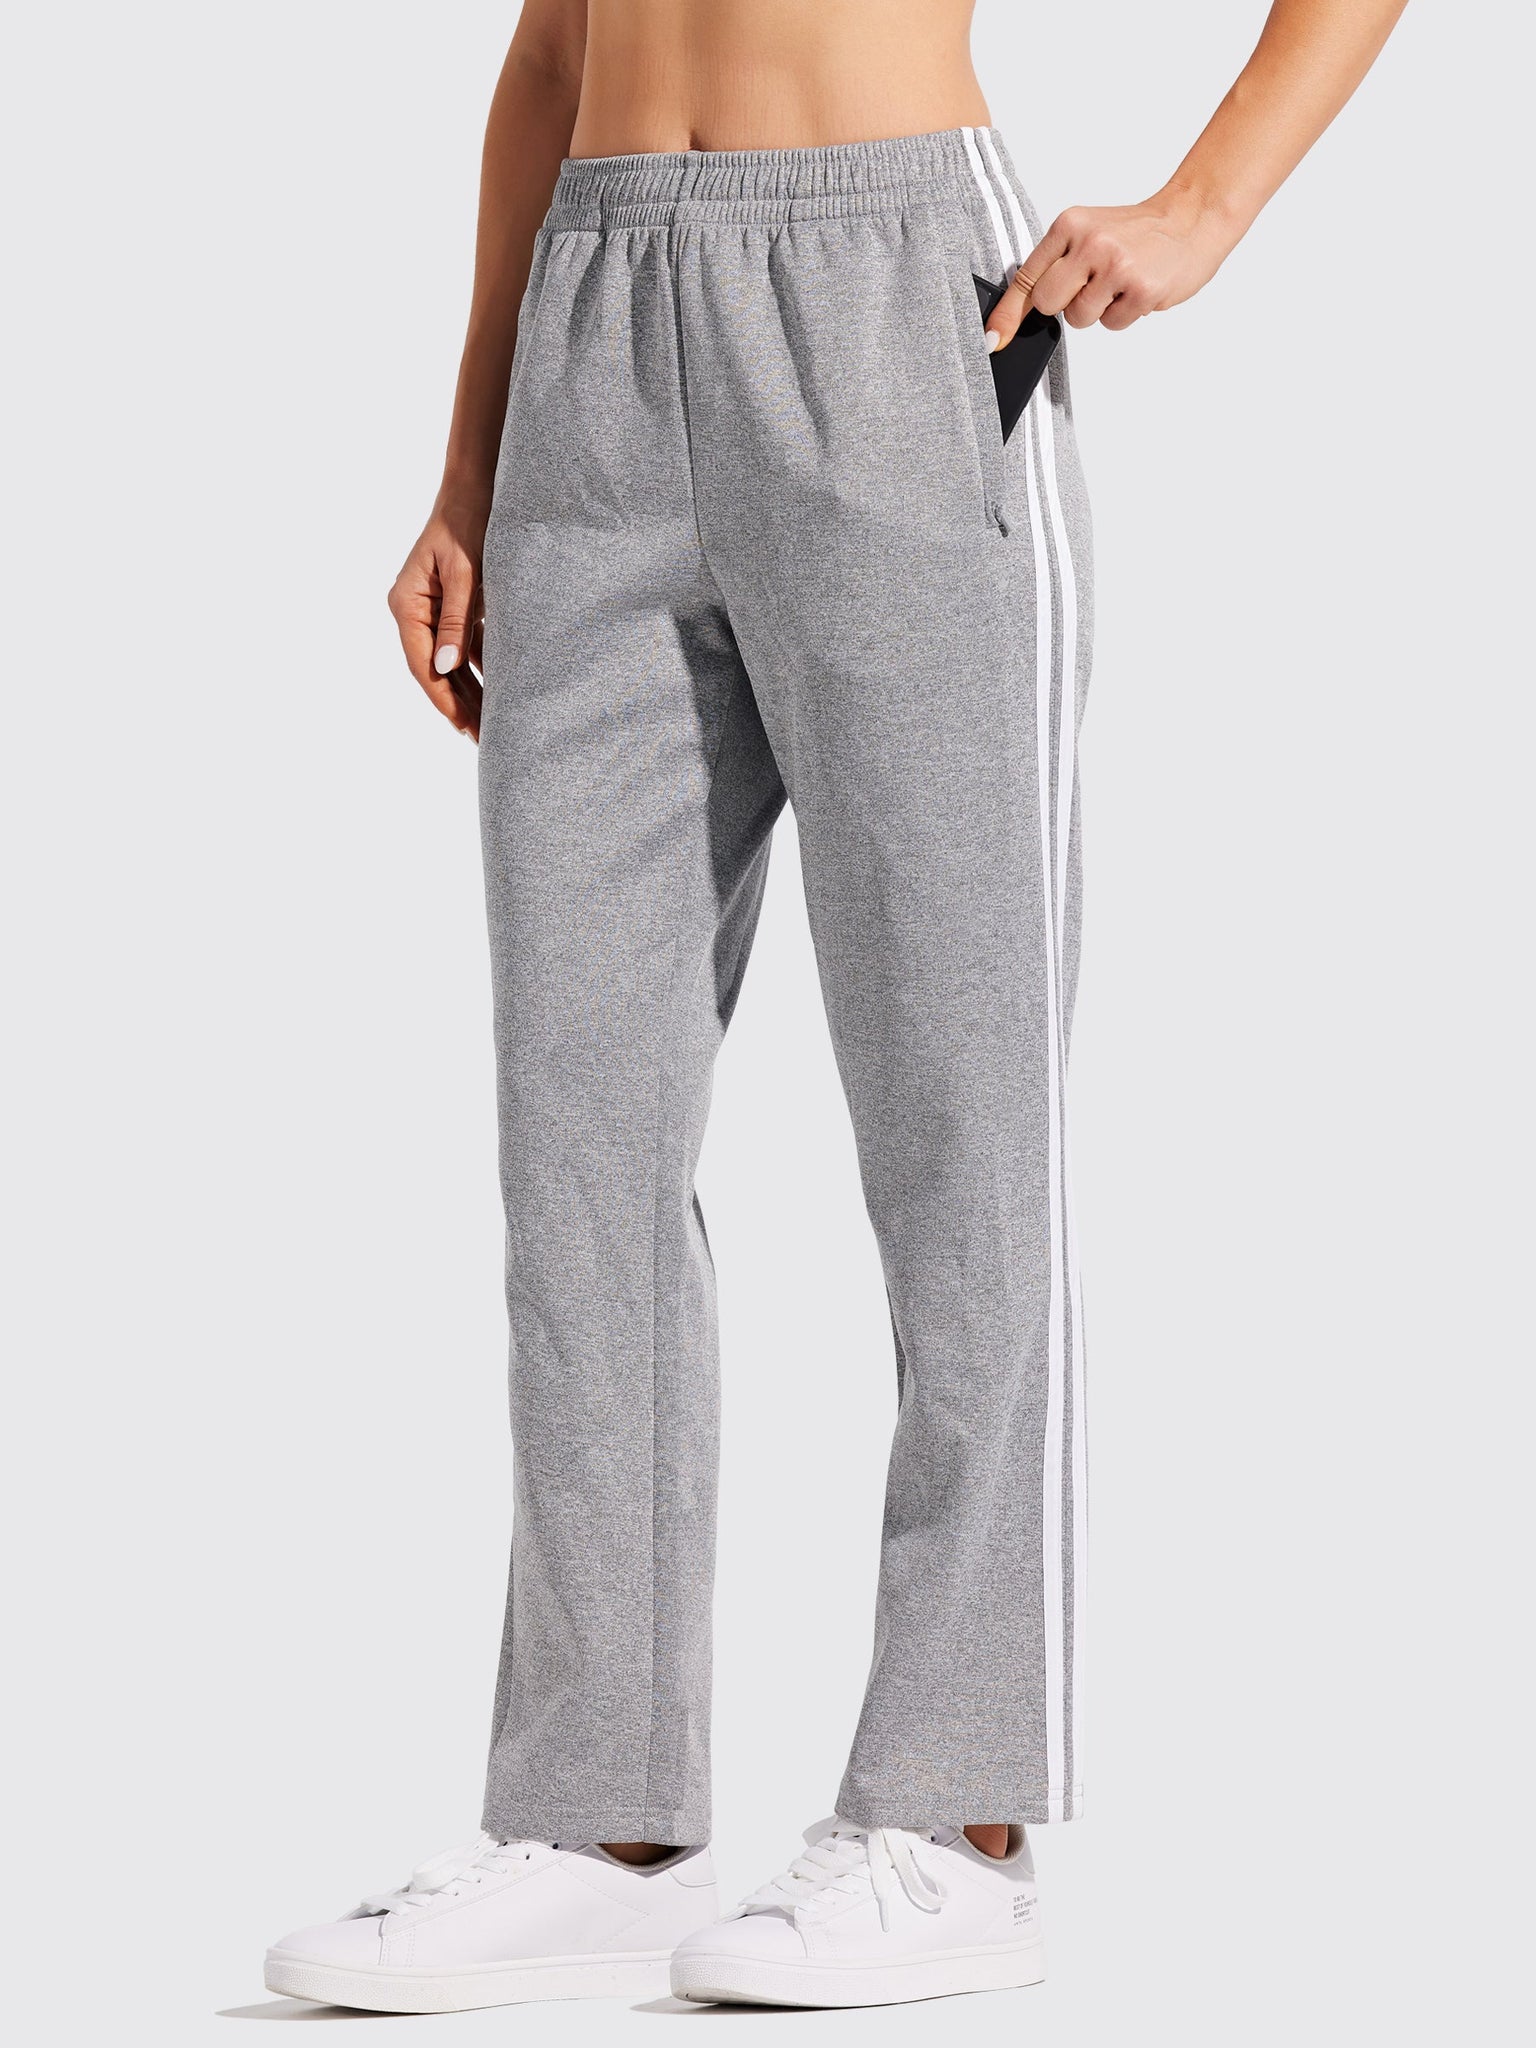 Willit Women's Warm Up Track Pants_CharcoalGray2